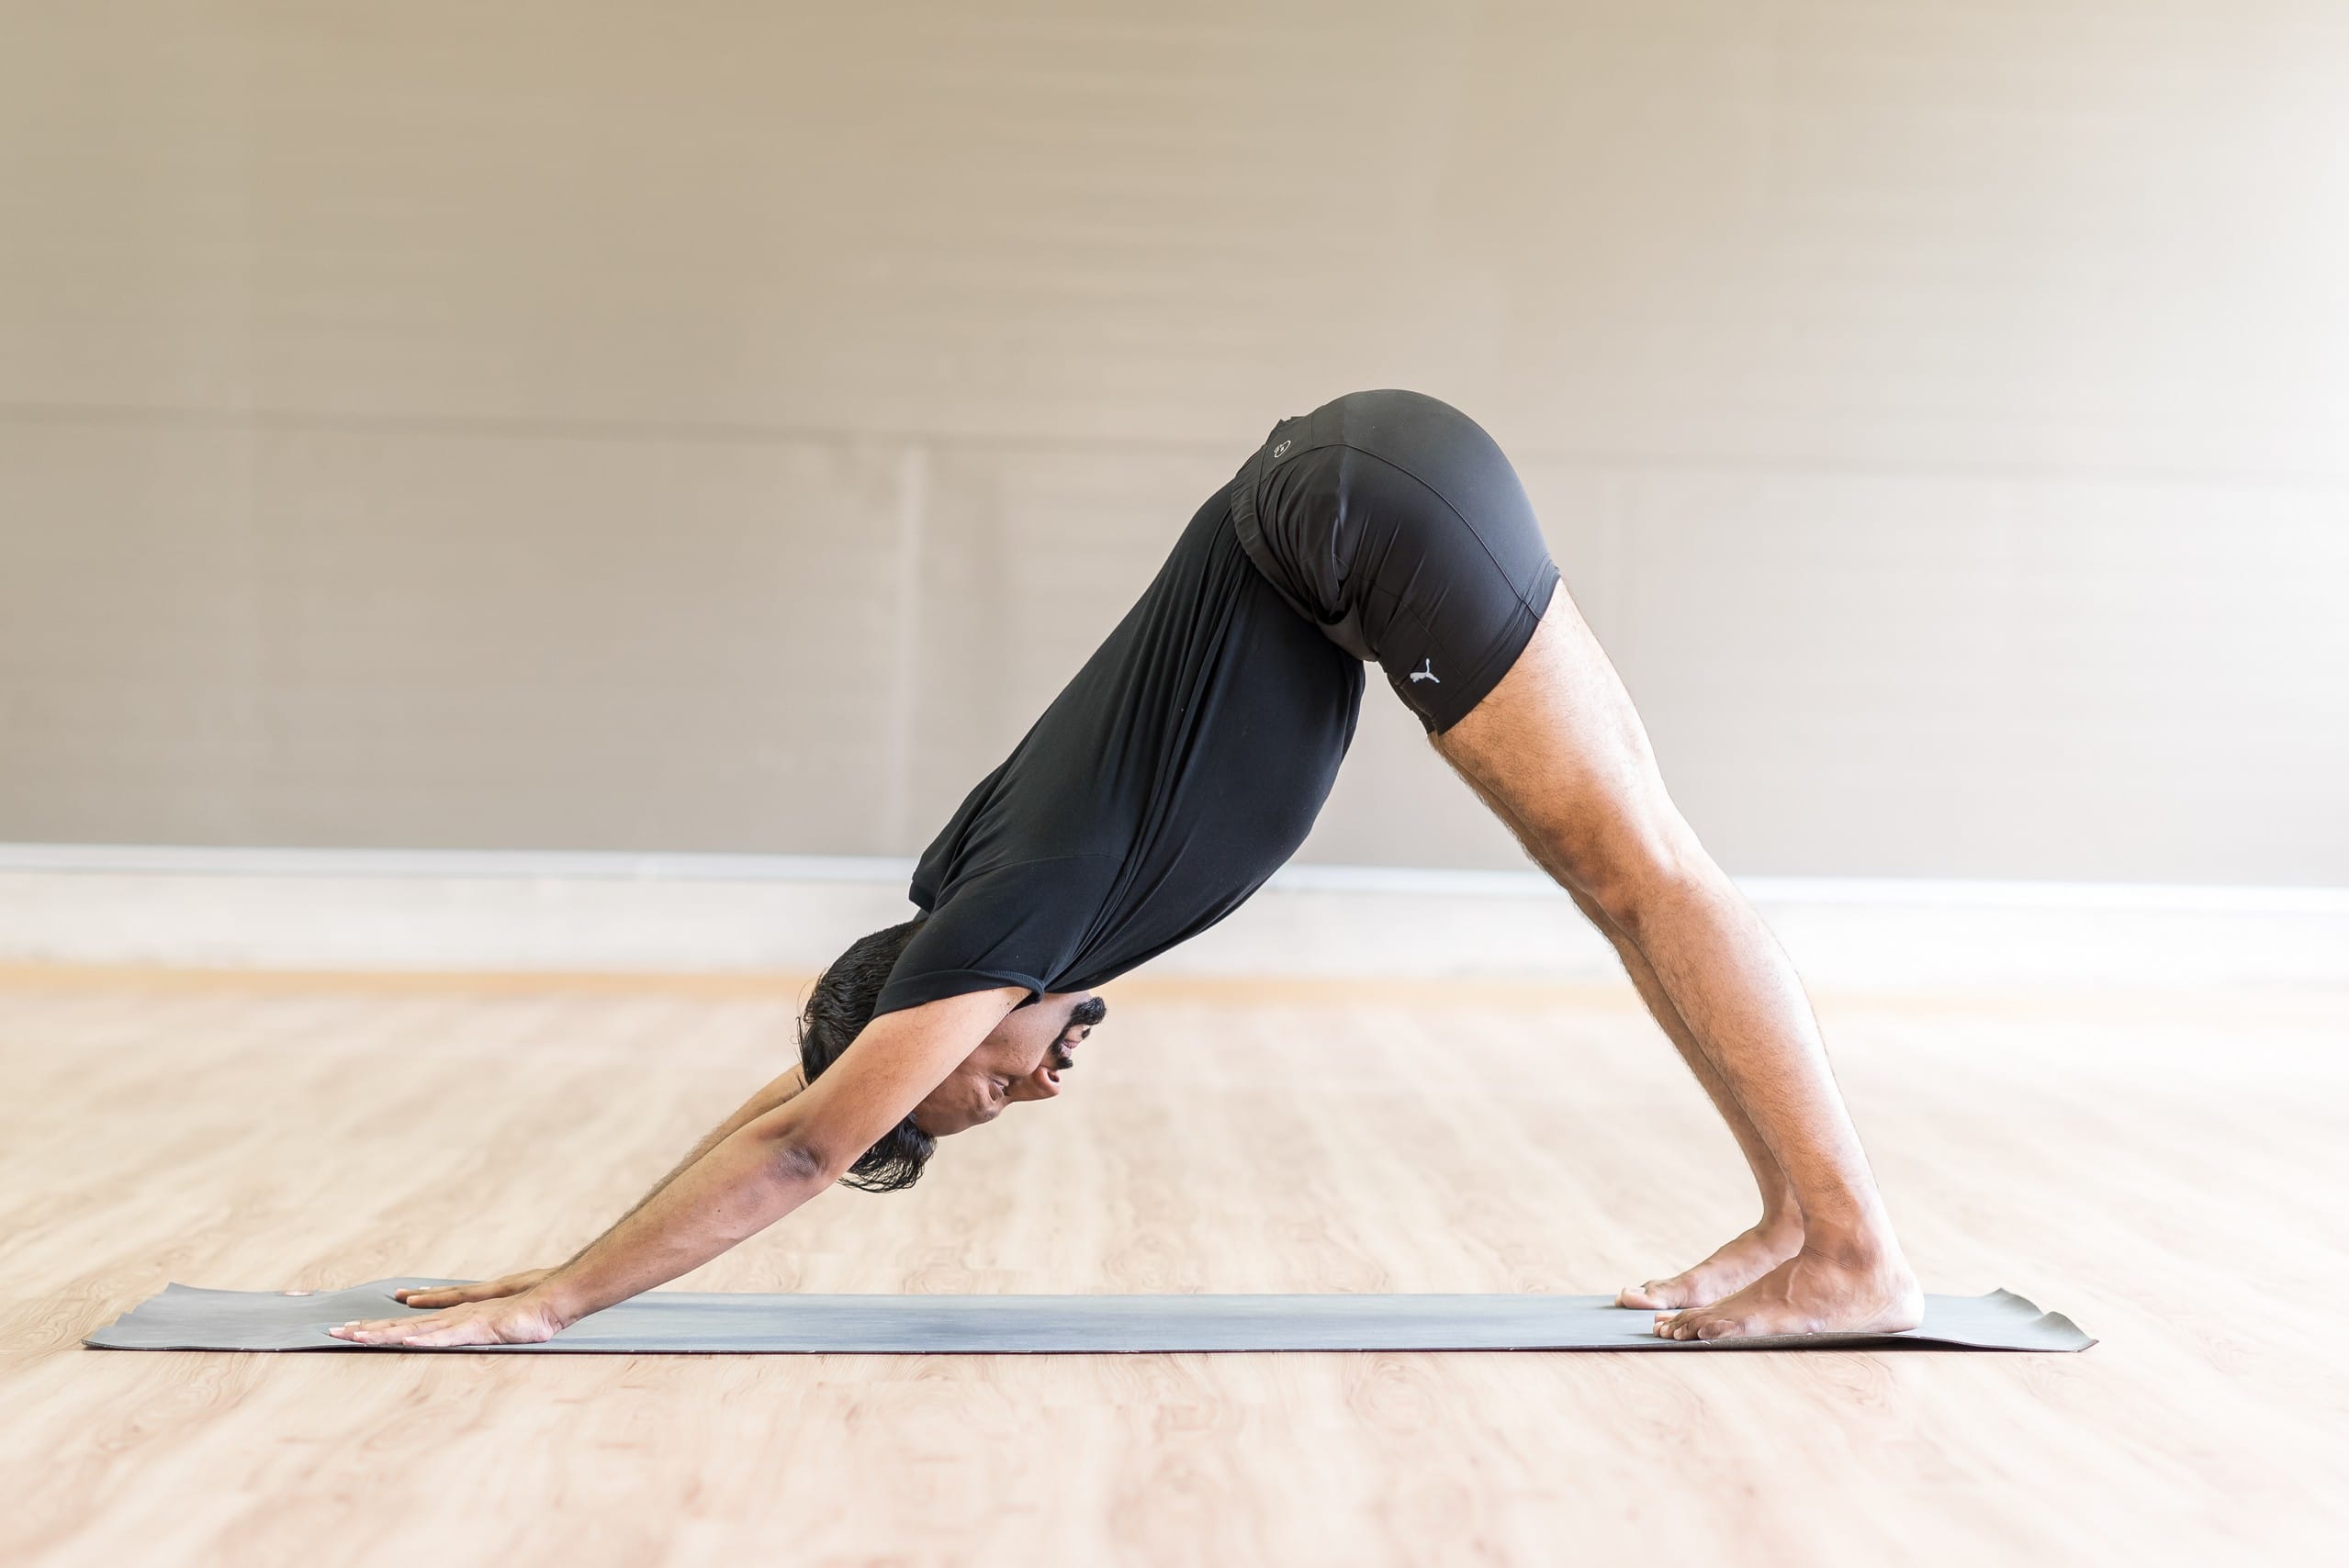 Yoga Sequence to Relieve Lower Back Pain | POPSUGAR Fitness